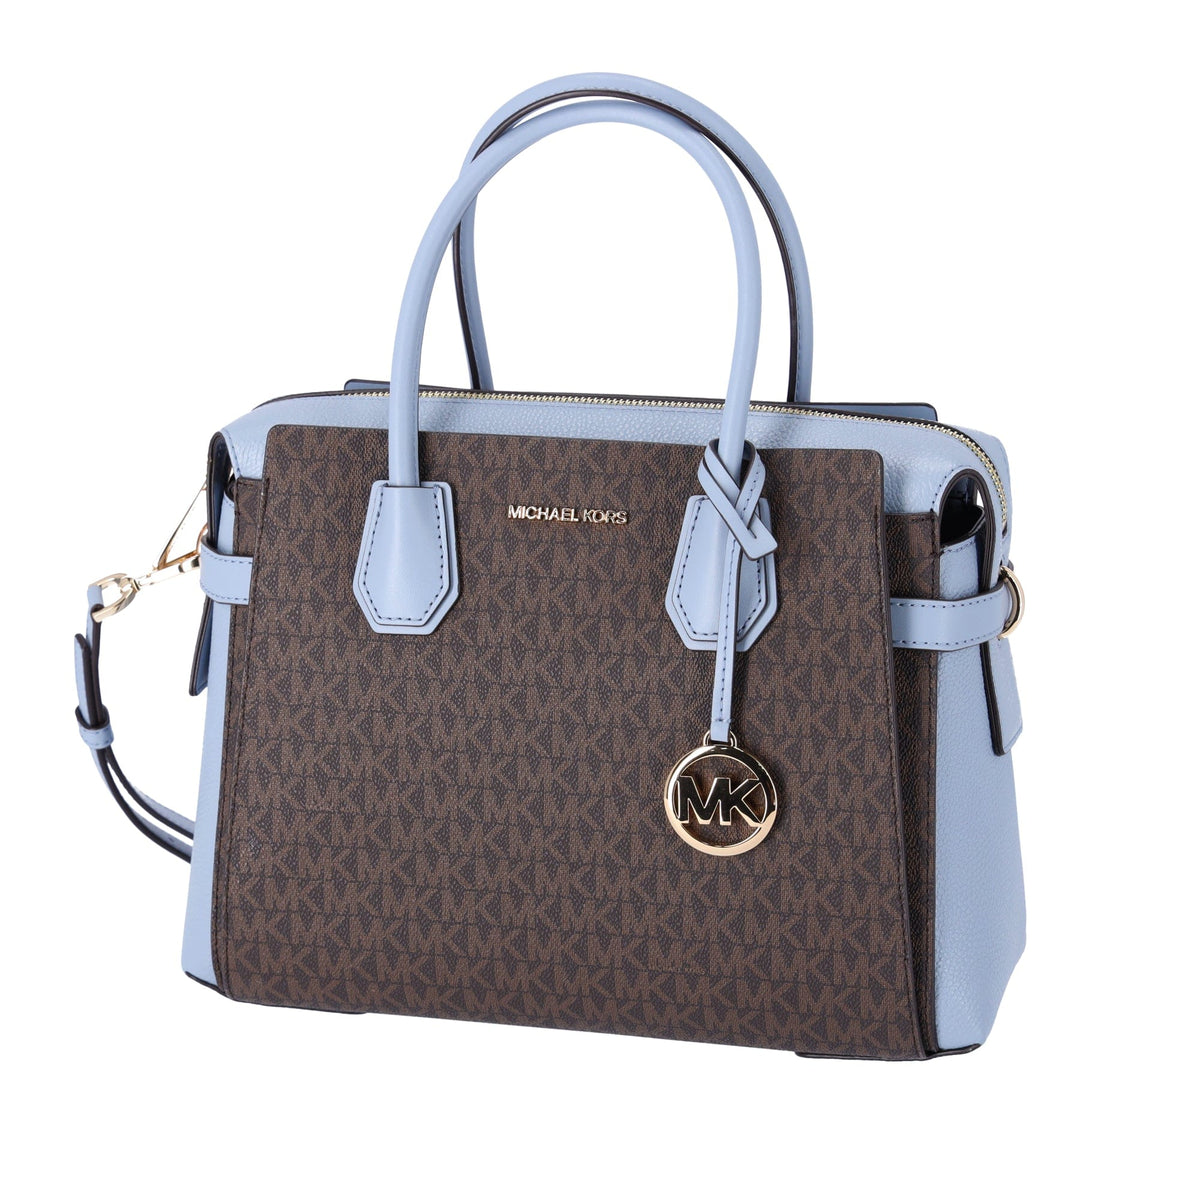 MICHAEL KORS BAG NEW COLLECTION REVIEW !! / MERCER BELTED SATCHEL